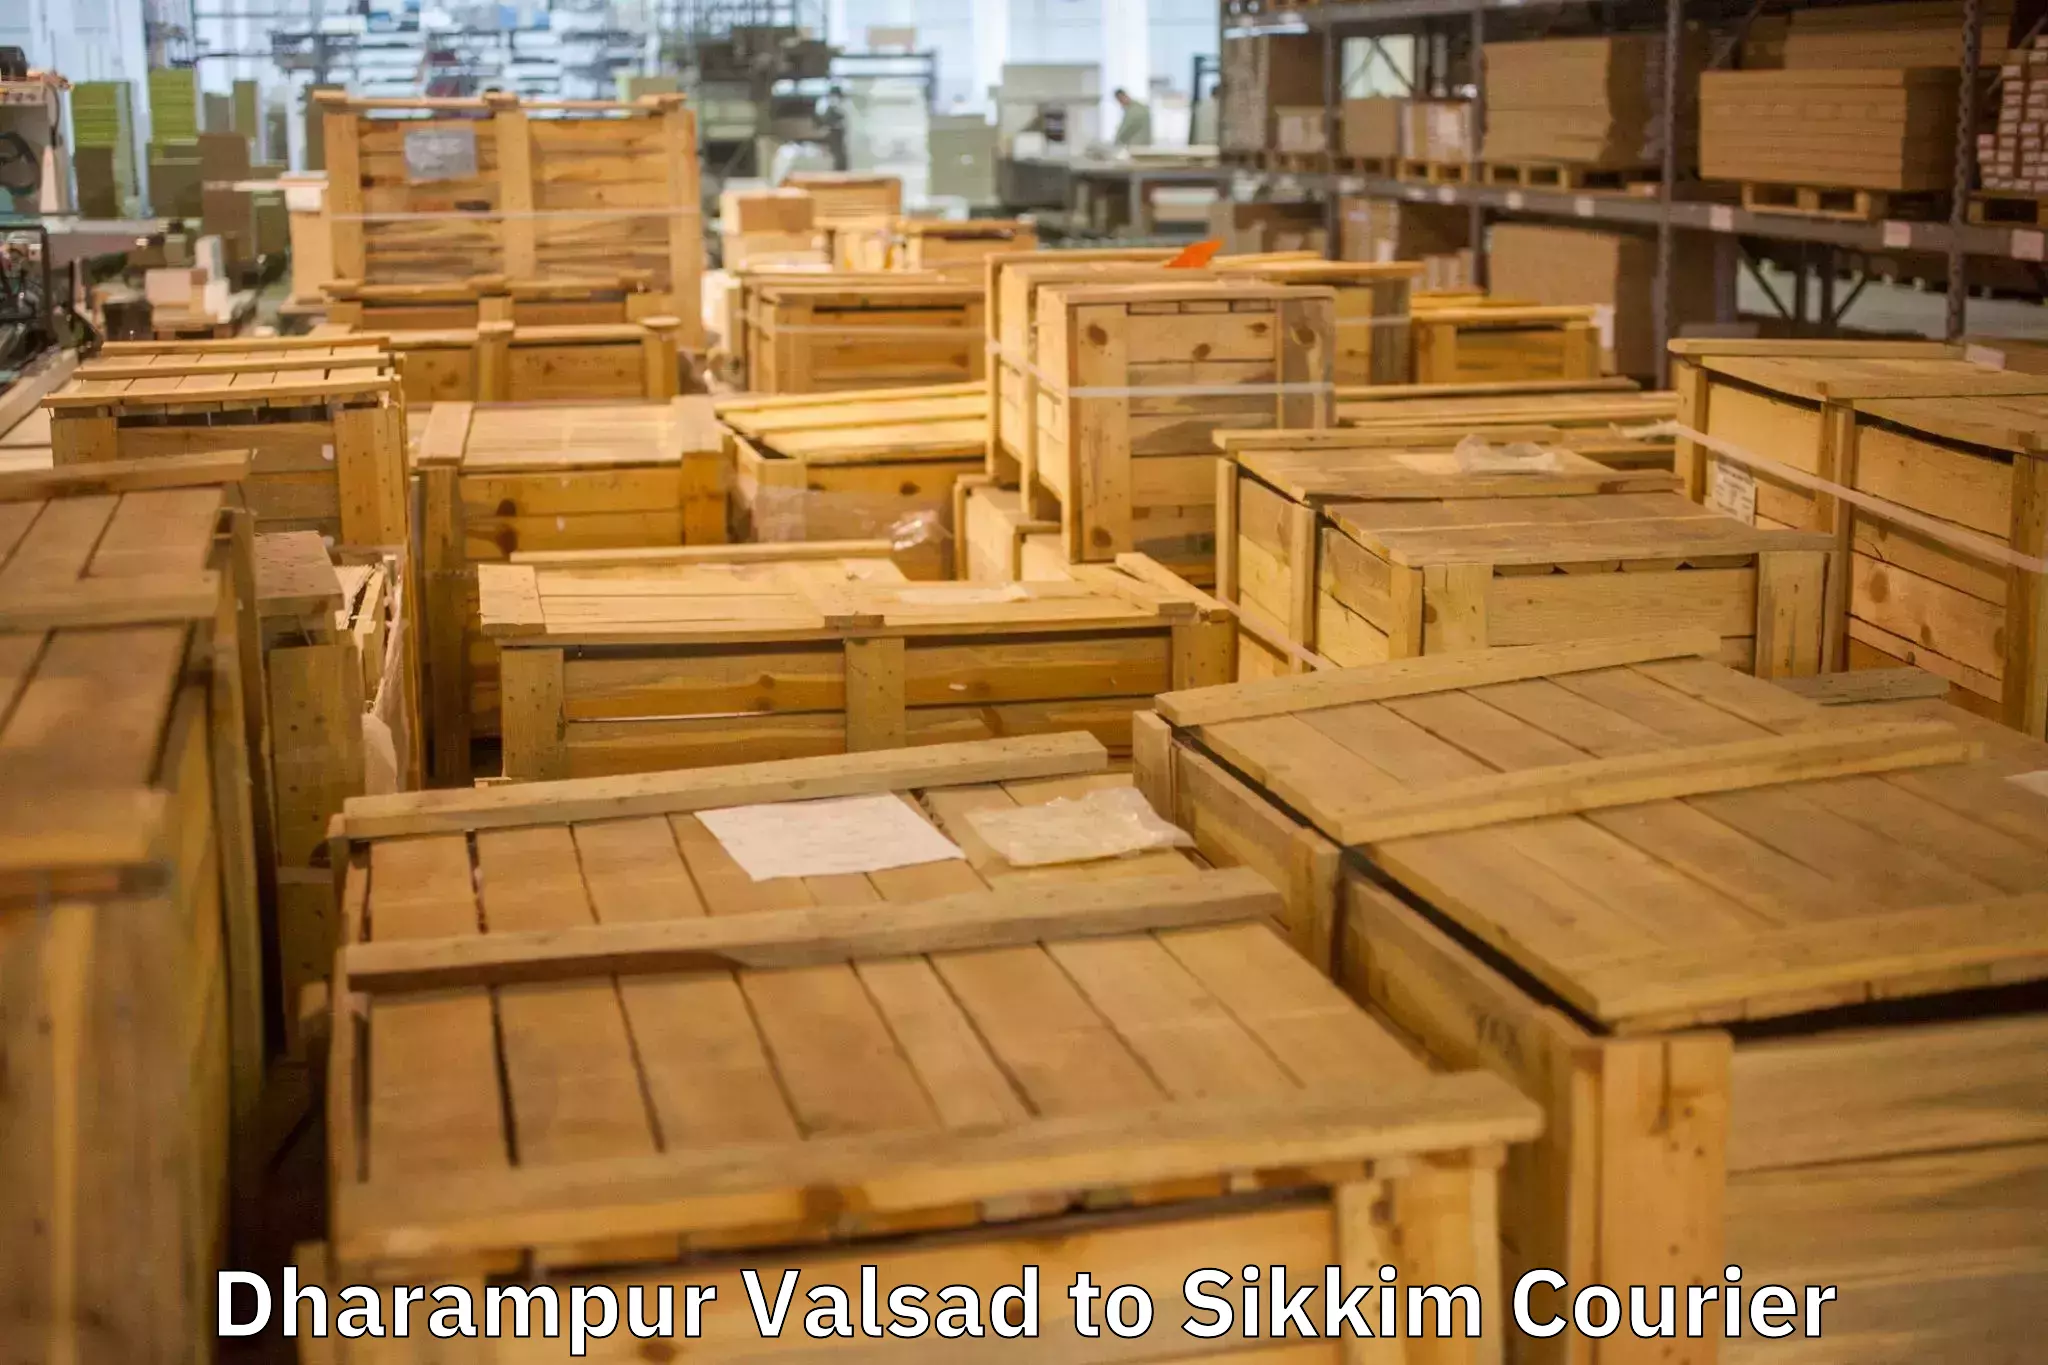 Moving and storage services Dharampur Valsad to East Sikkim